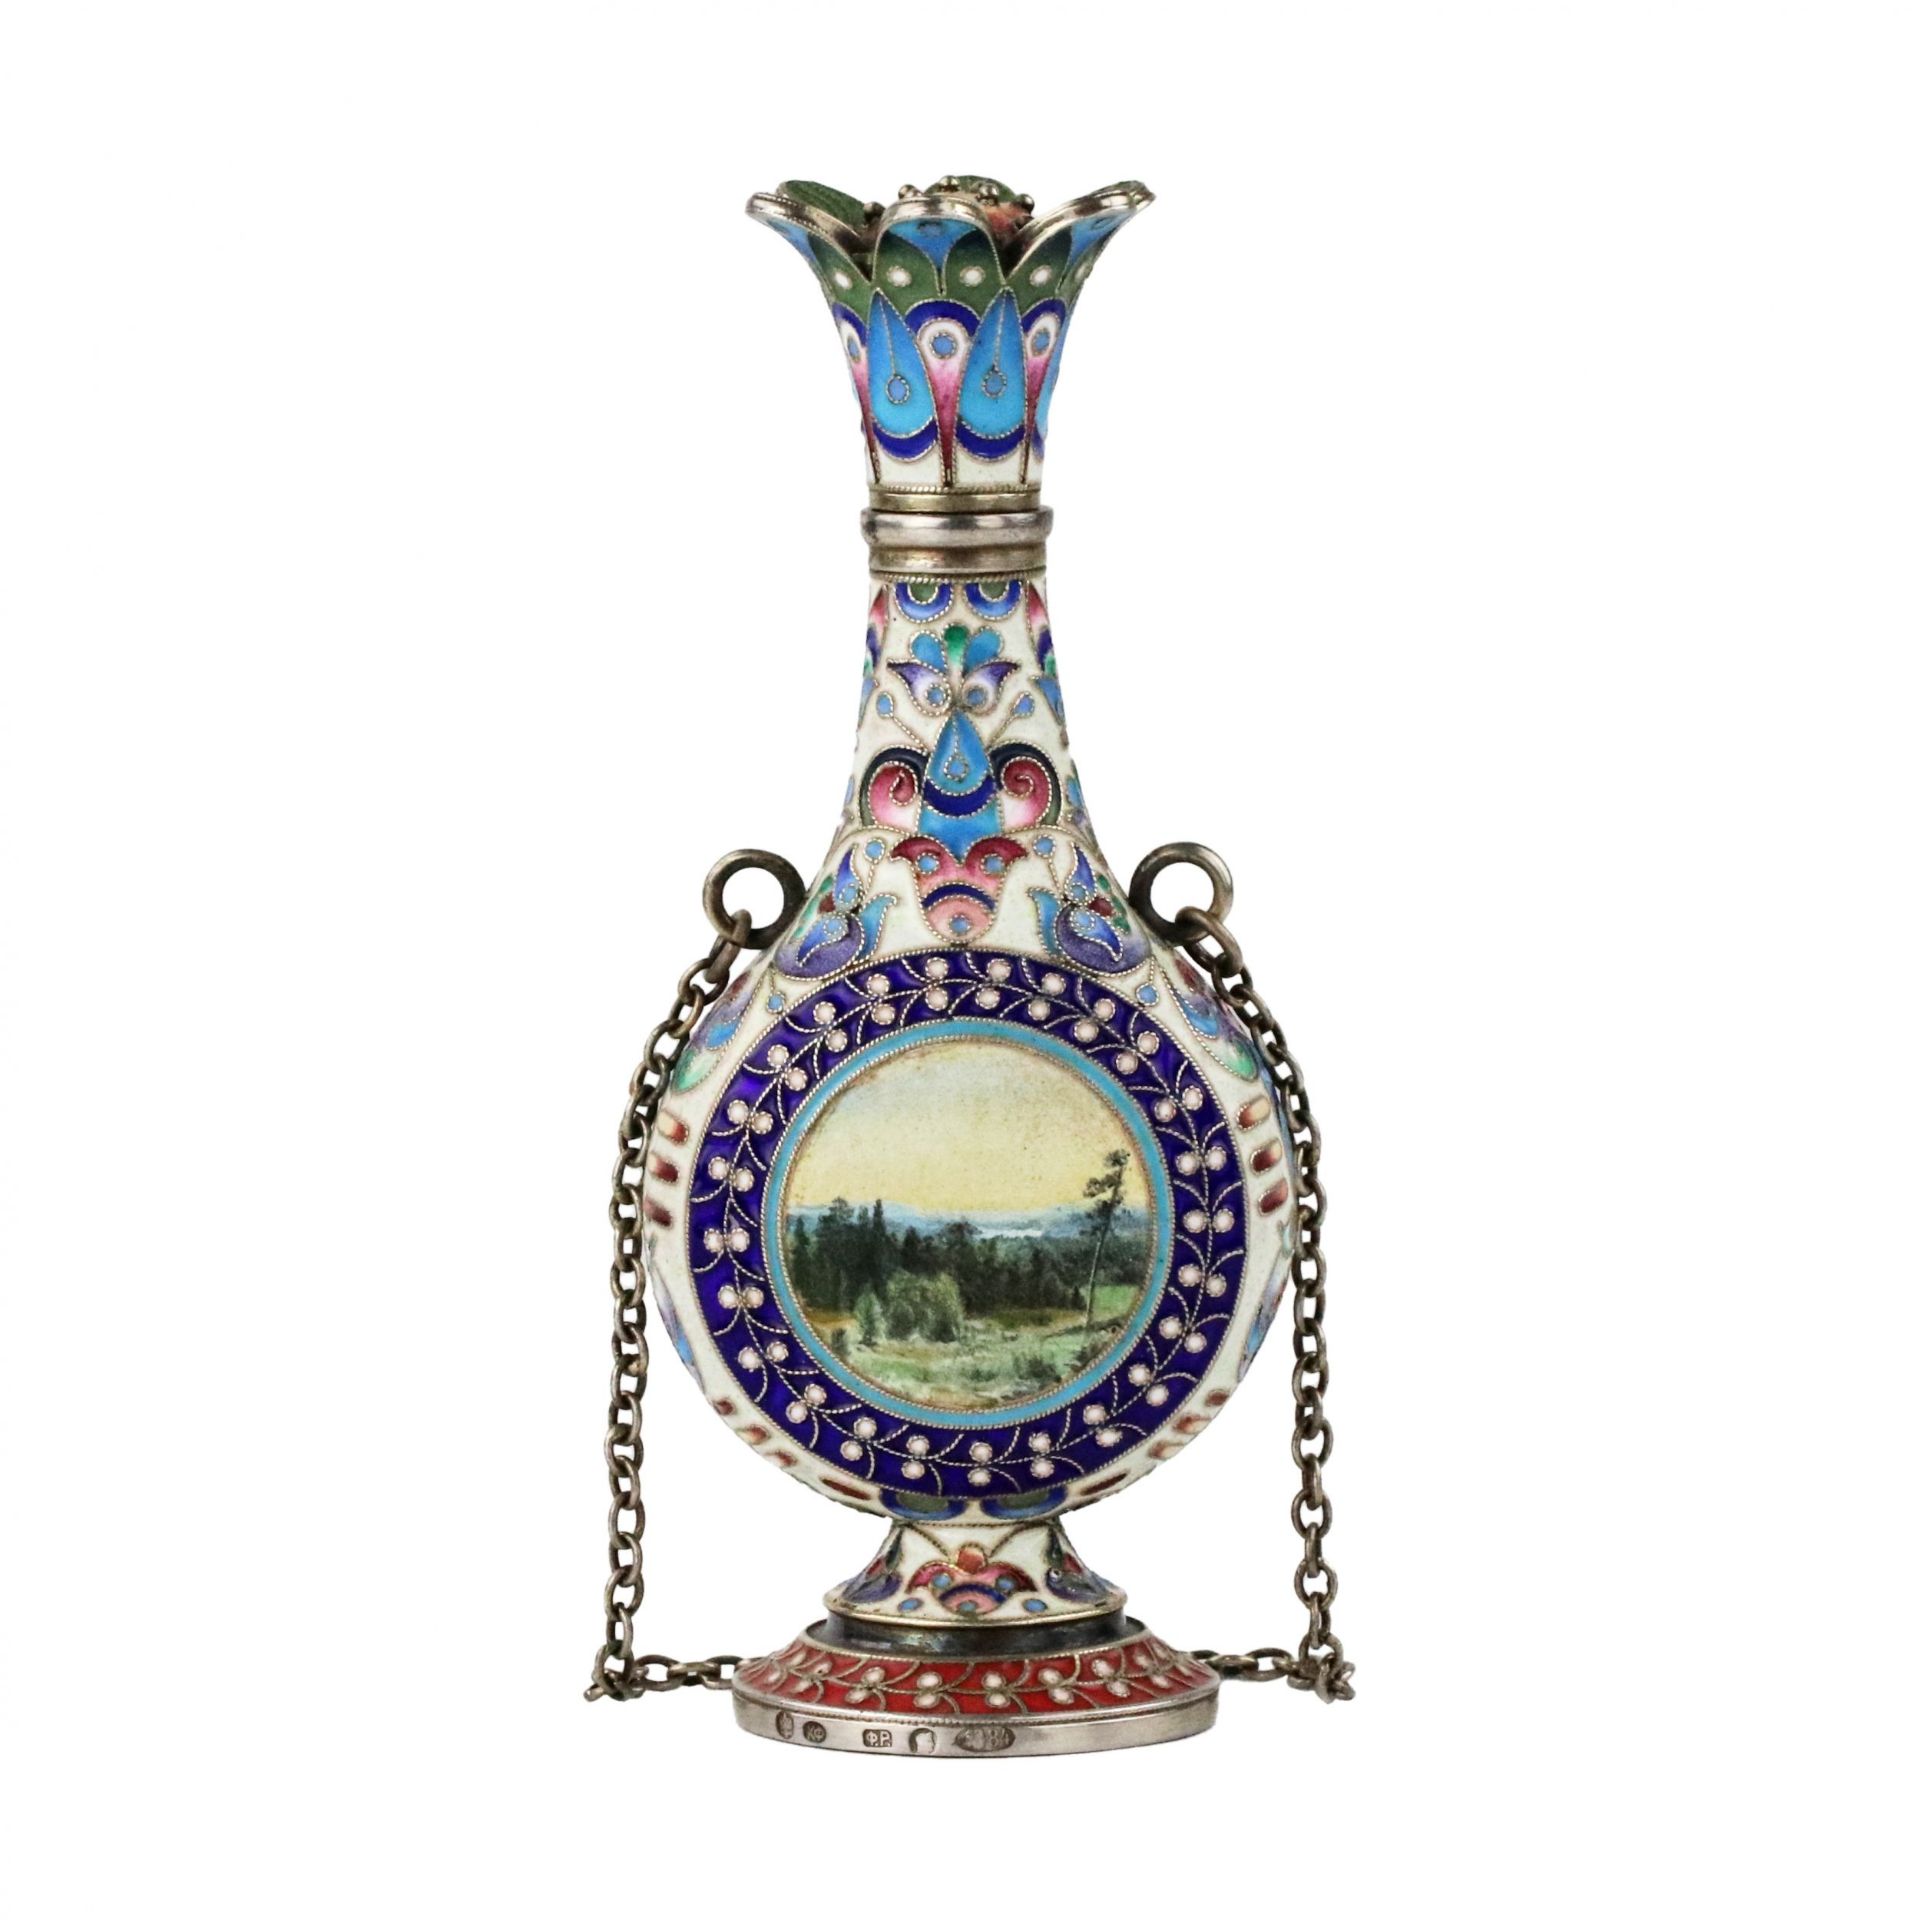 Silver perfume bottle in cloisonne enamel with painted miniatures. - Image 2 of 7